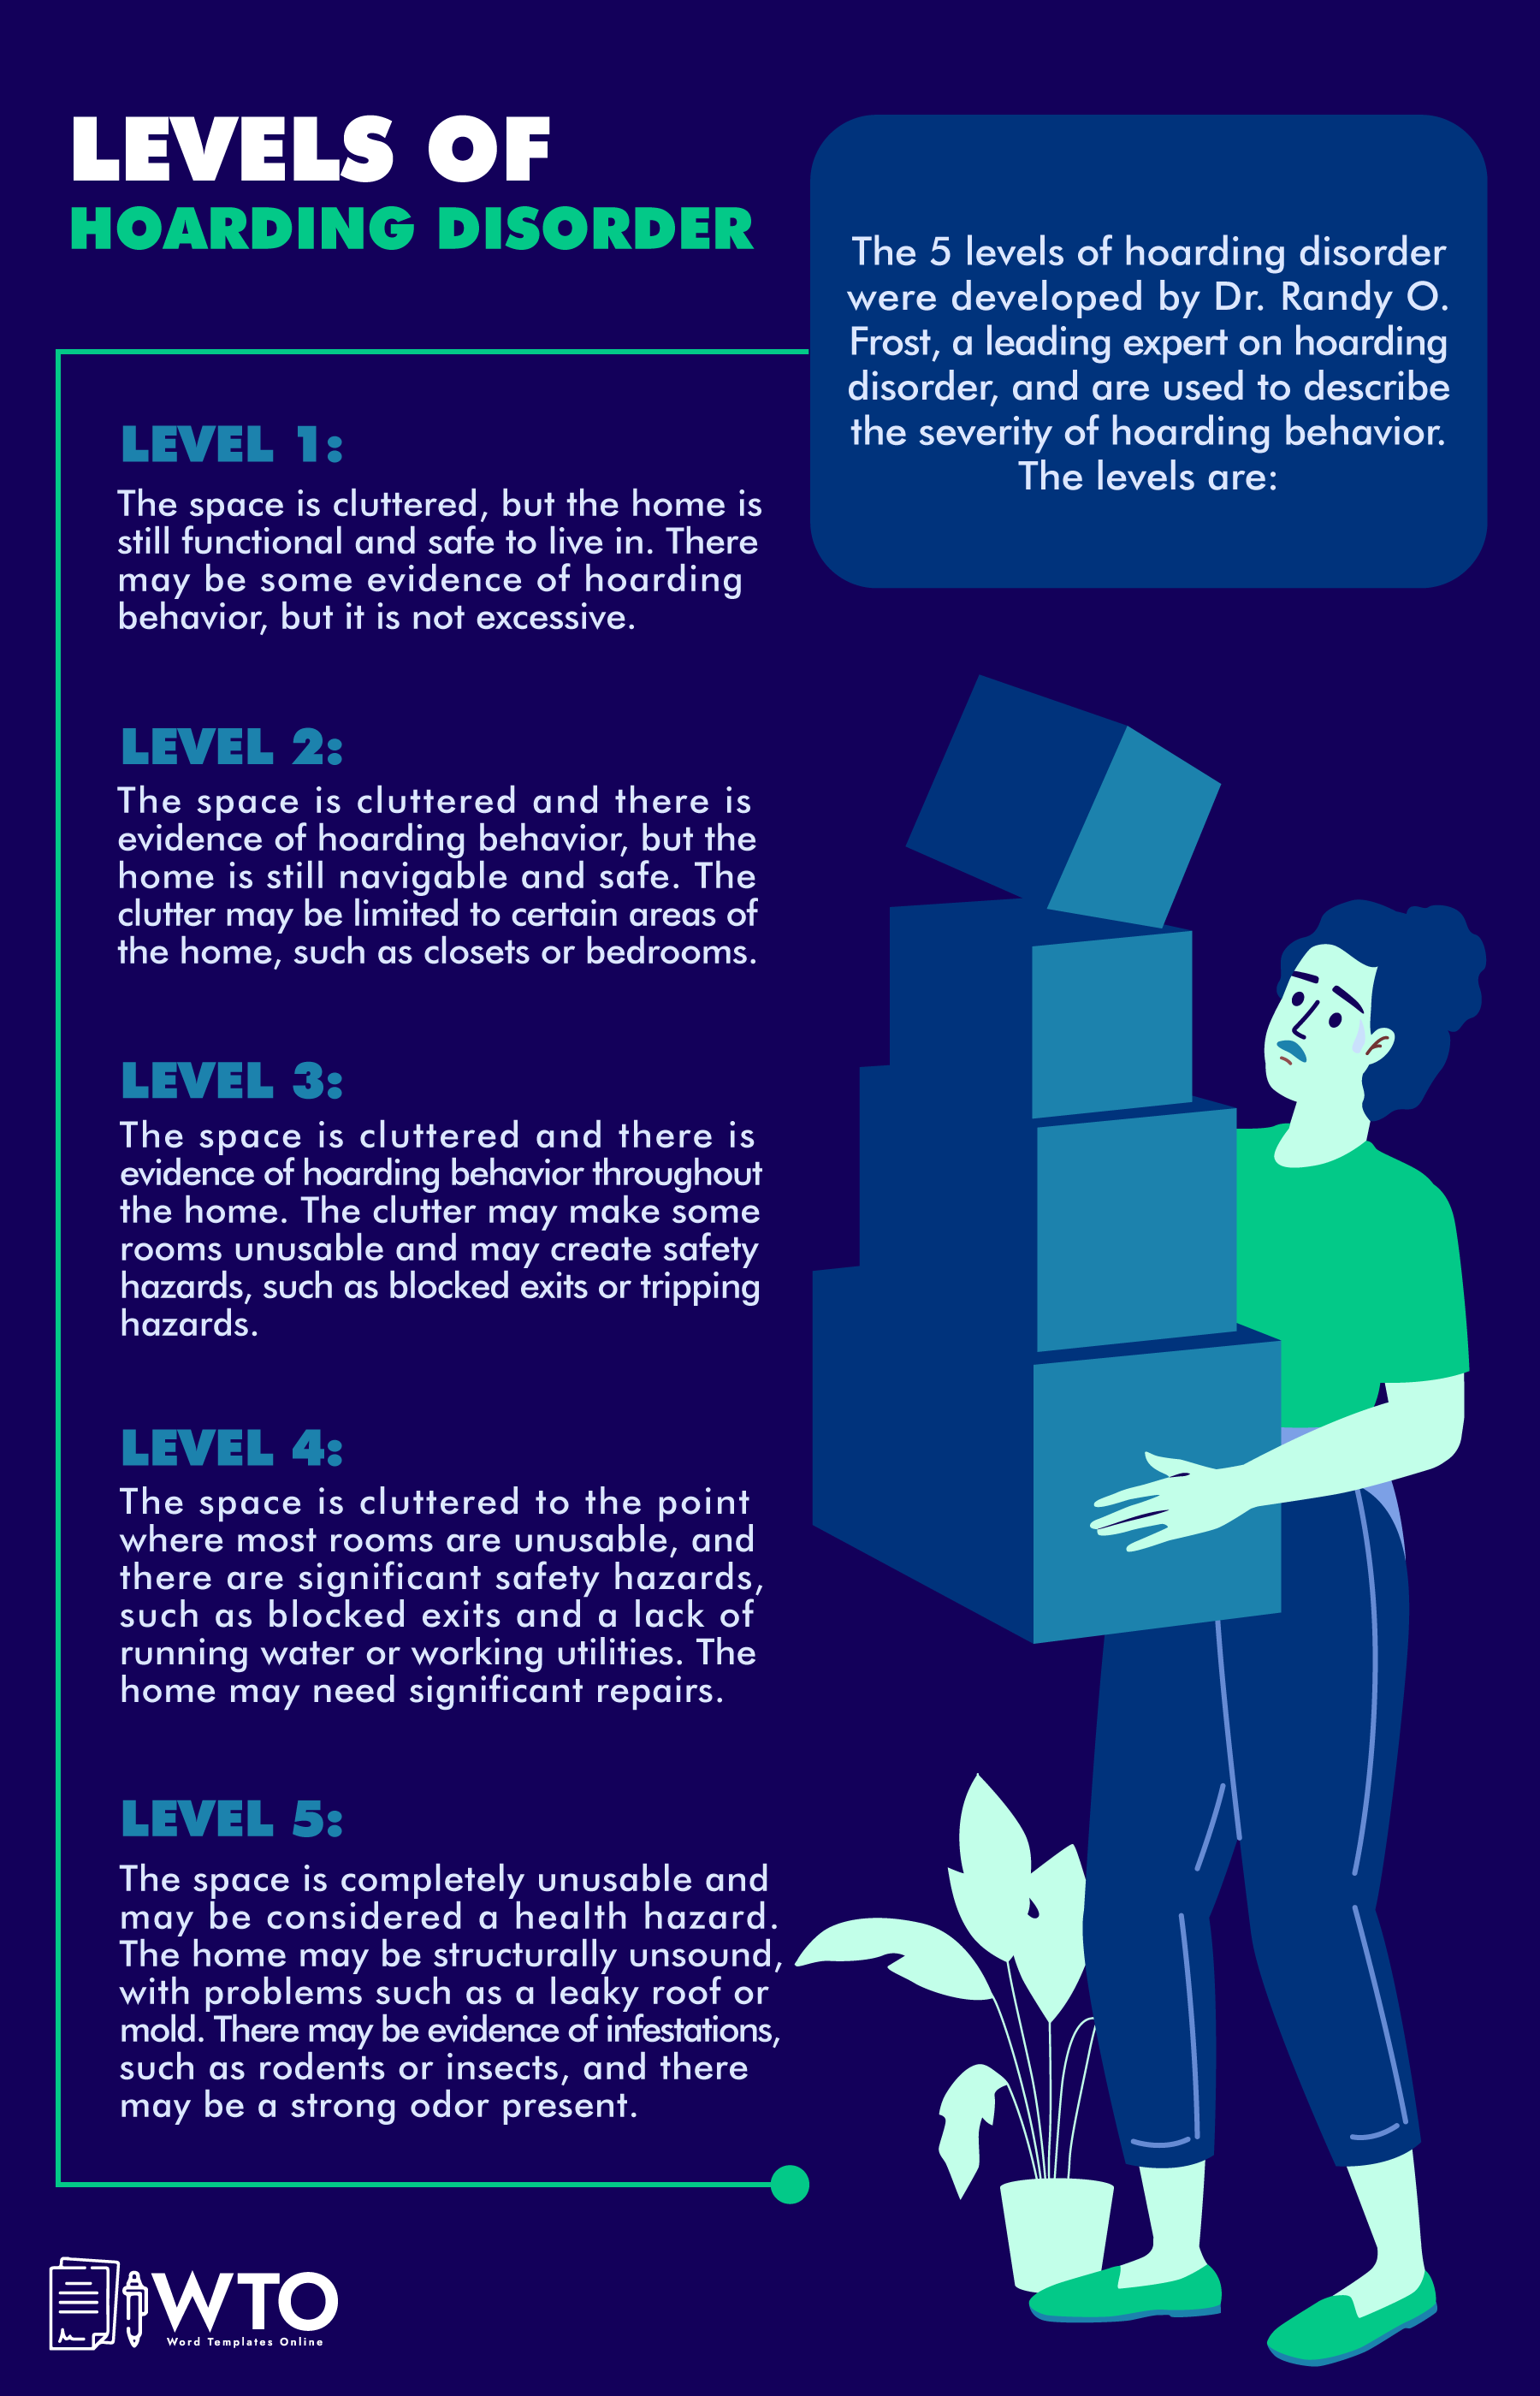 This infographic is about levels of hoarding disorder.